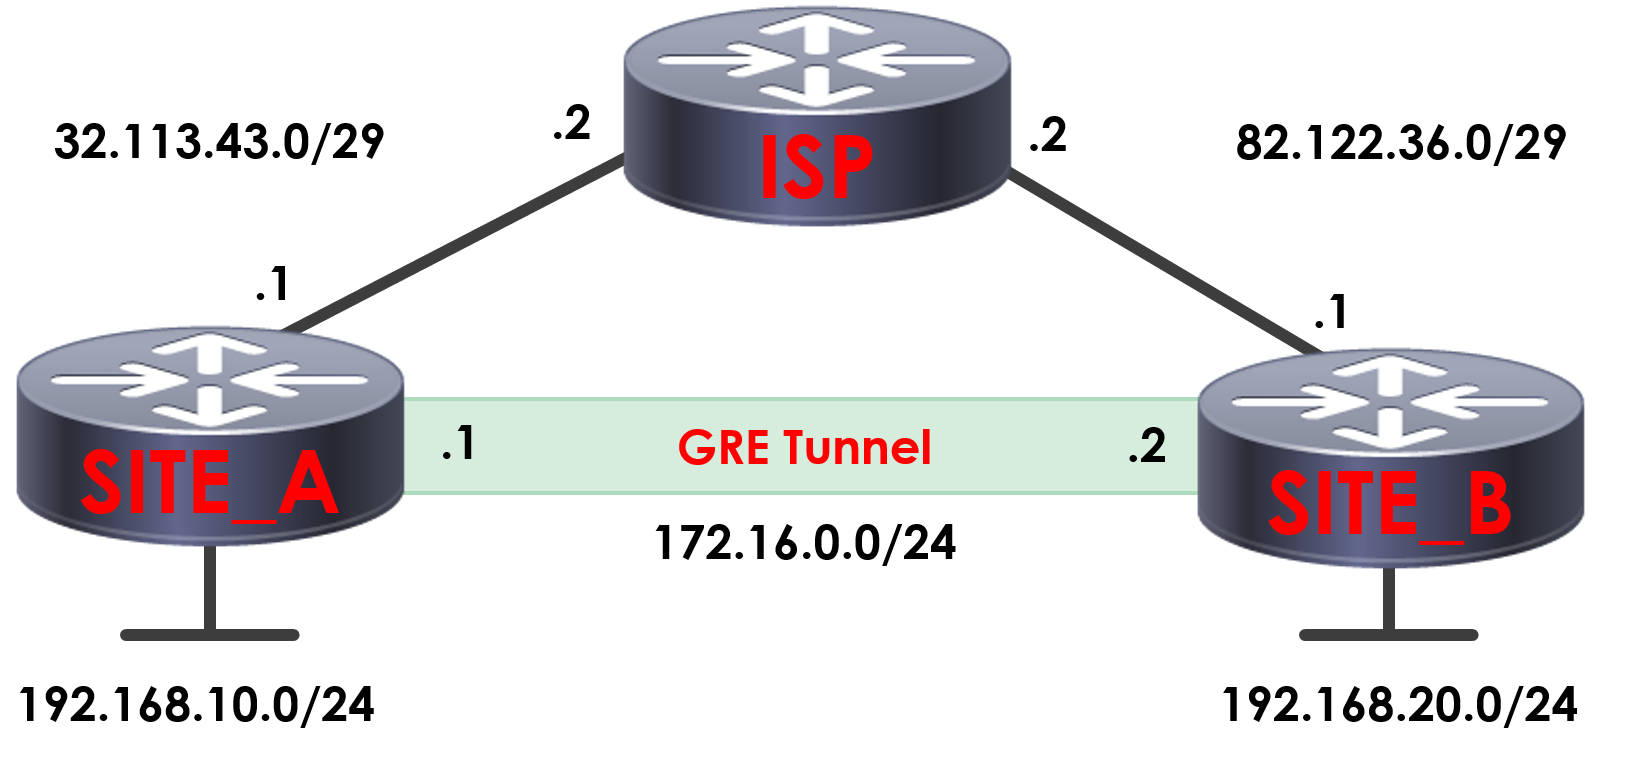 GRE tunneling topology